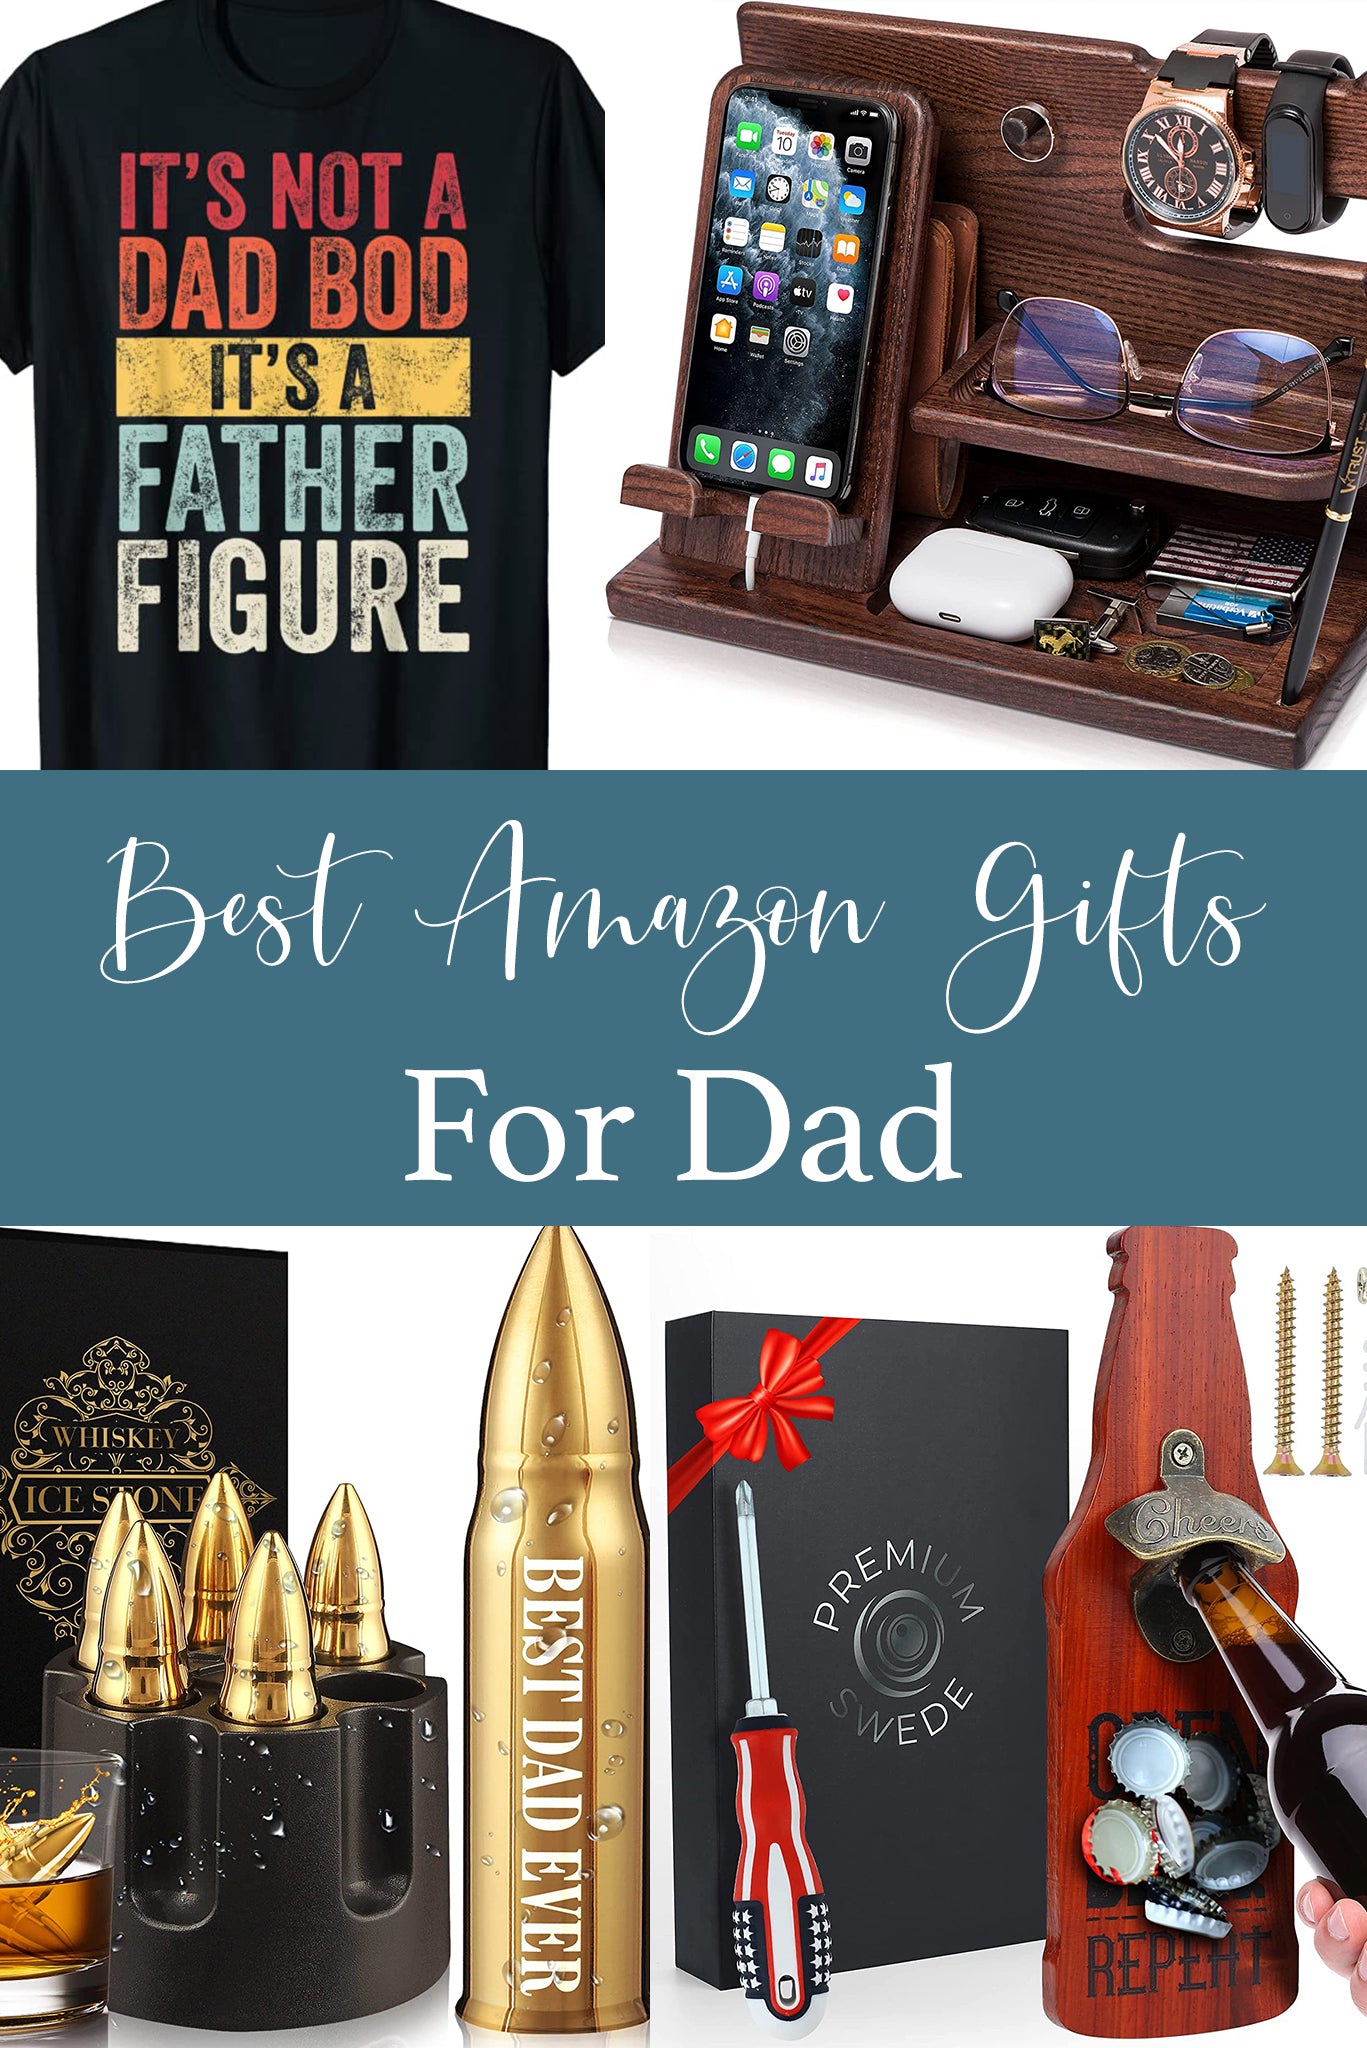 Best Amazon Gifts for Dad - Pretty Collected